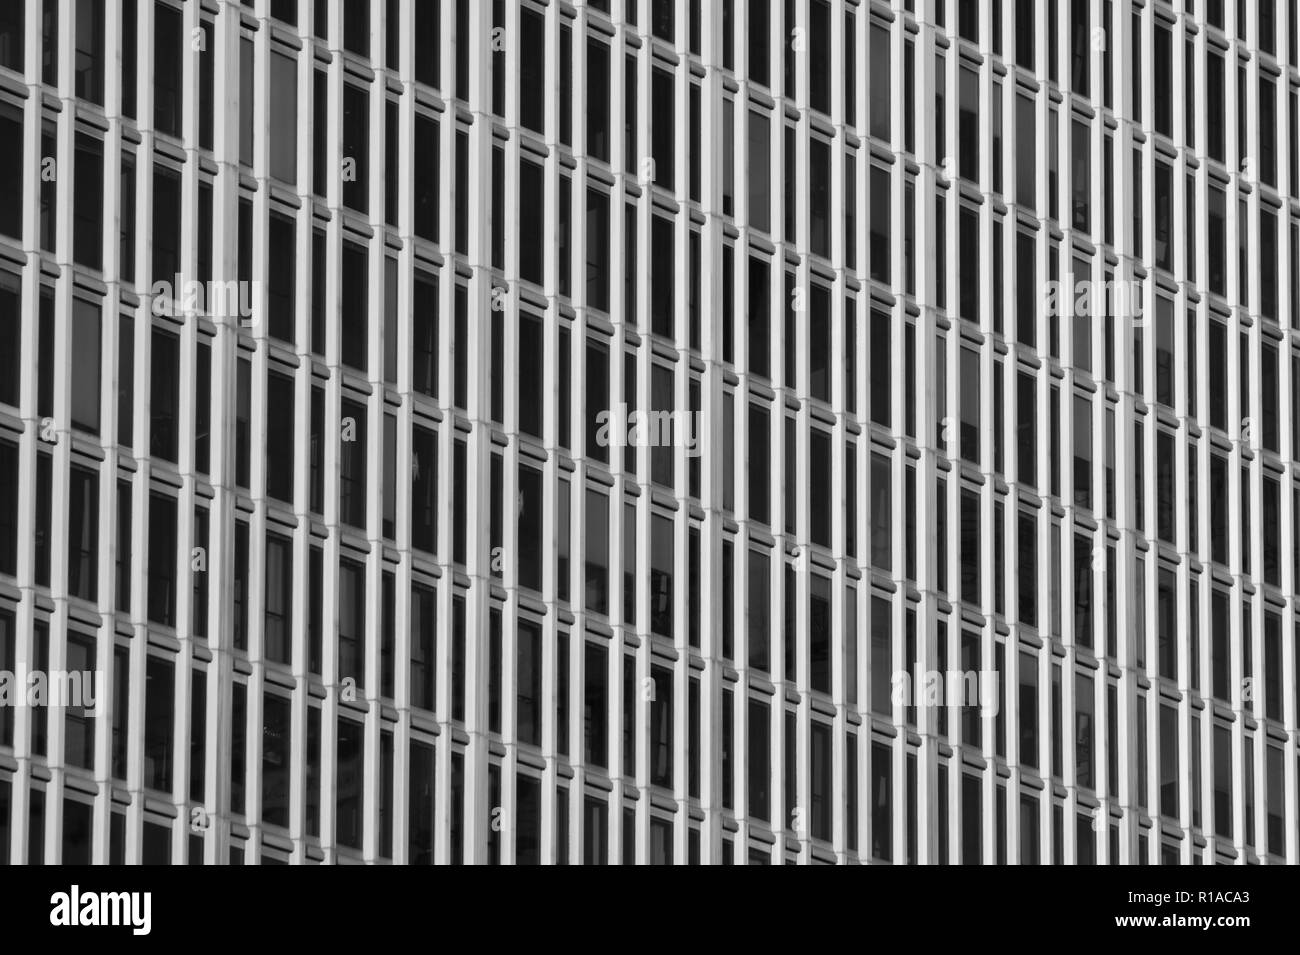 Parallel lines of windows. Abstract background Stock Photo